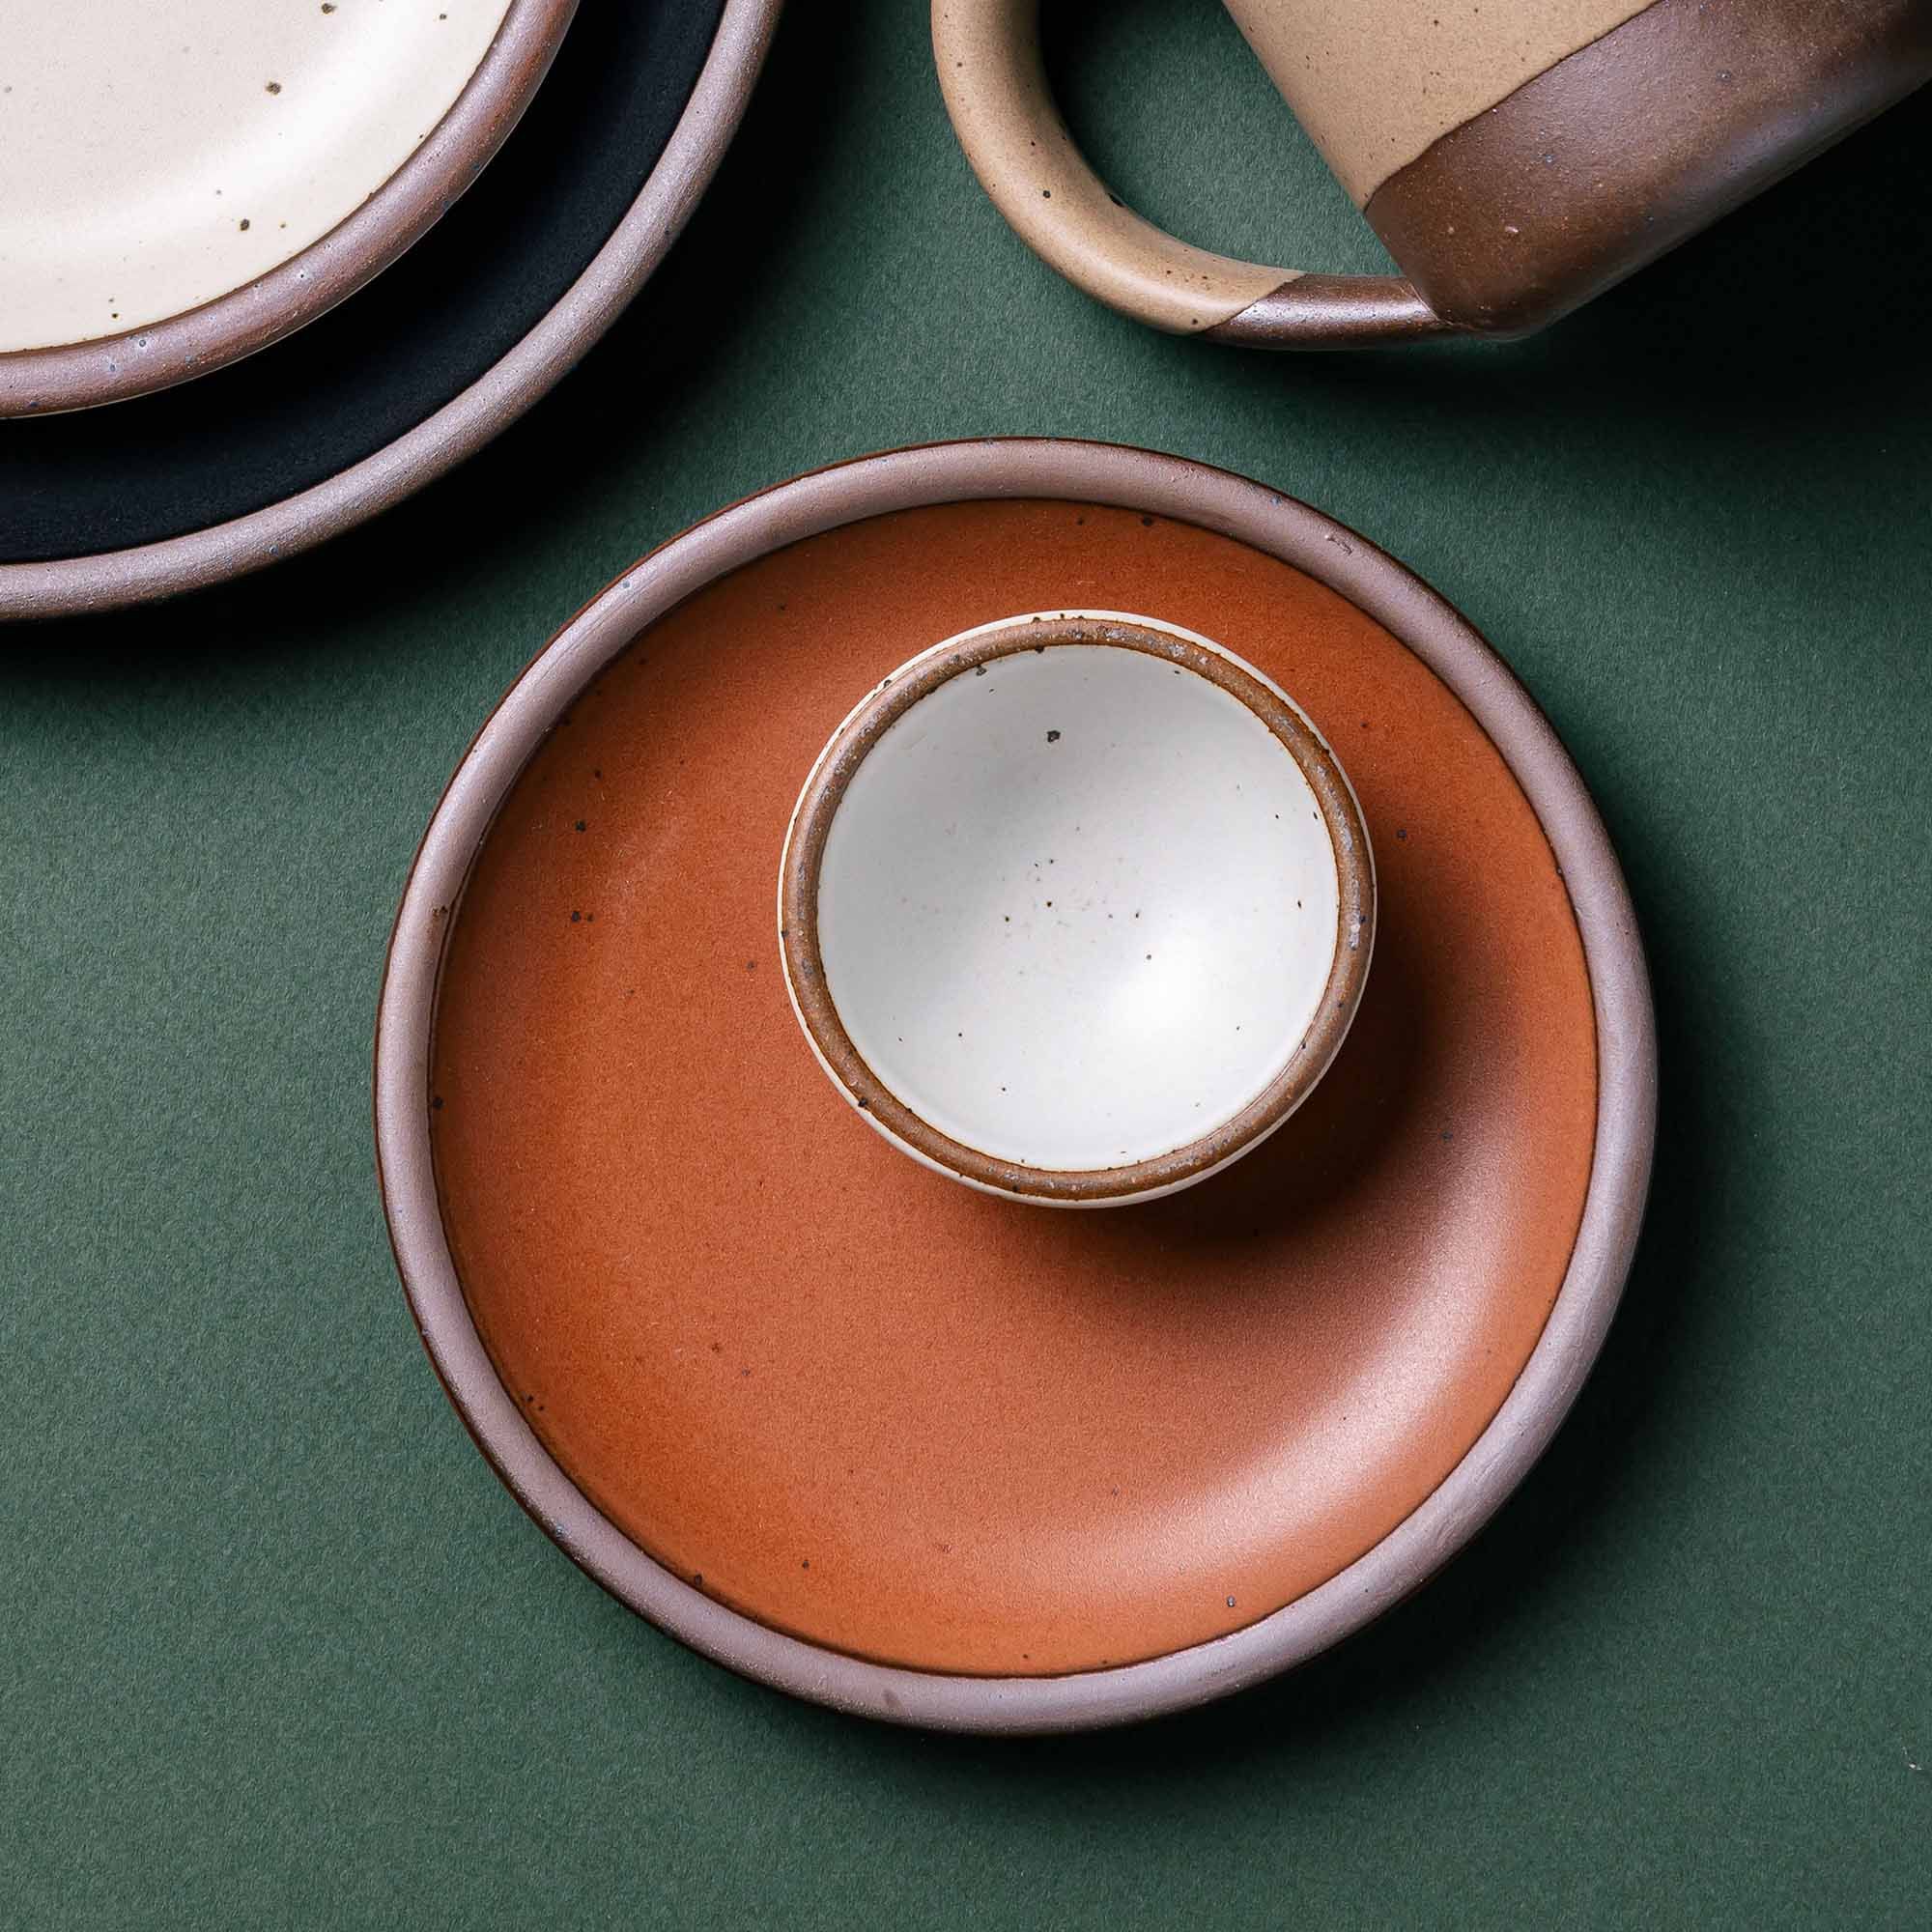 A tiny ceramic bowl in a cool white color sits on top of a dessert sized plate in a burnt terracotta color